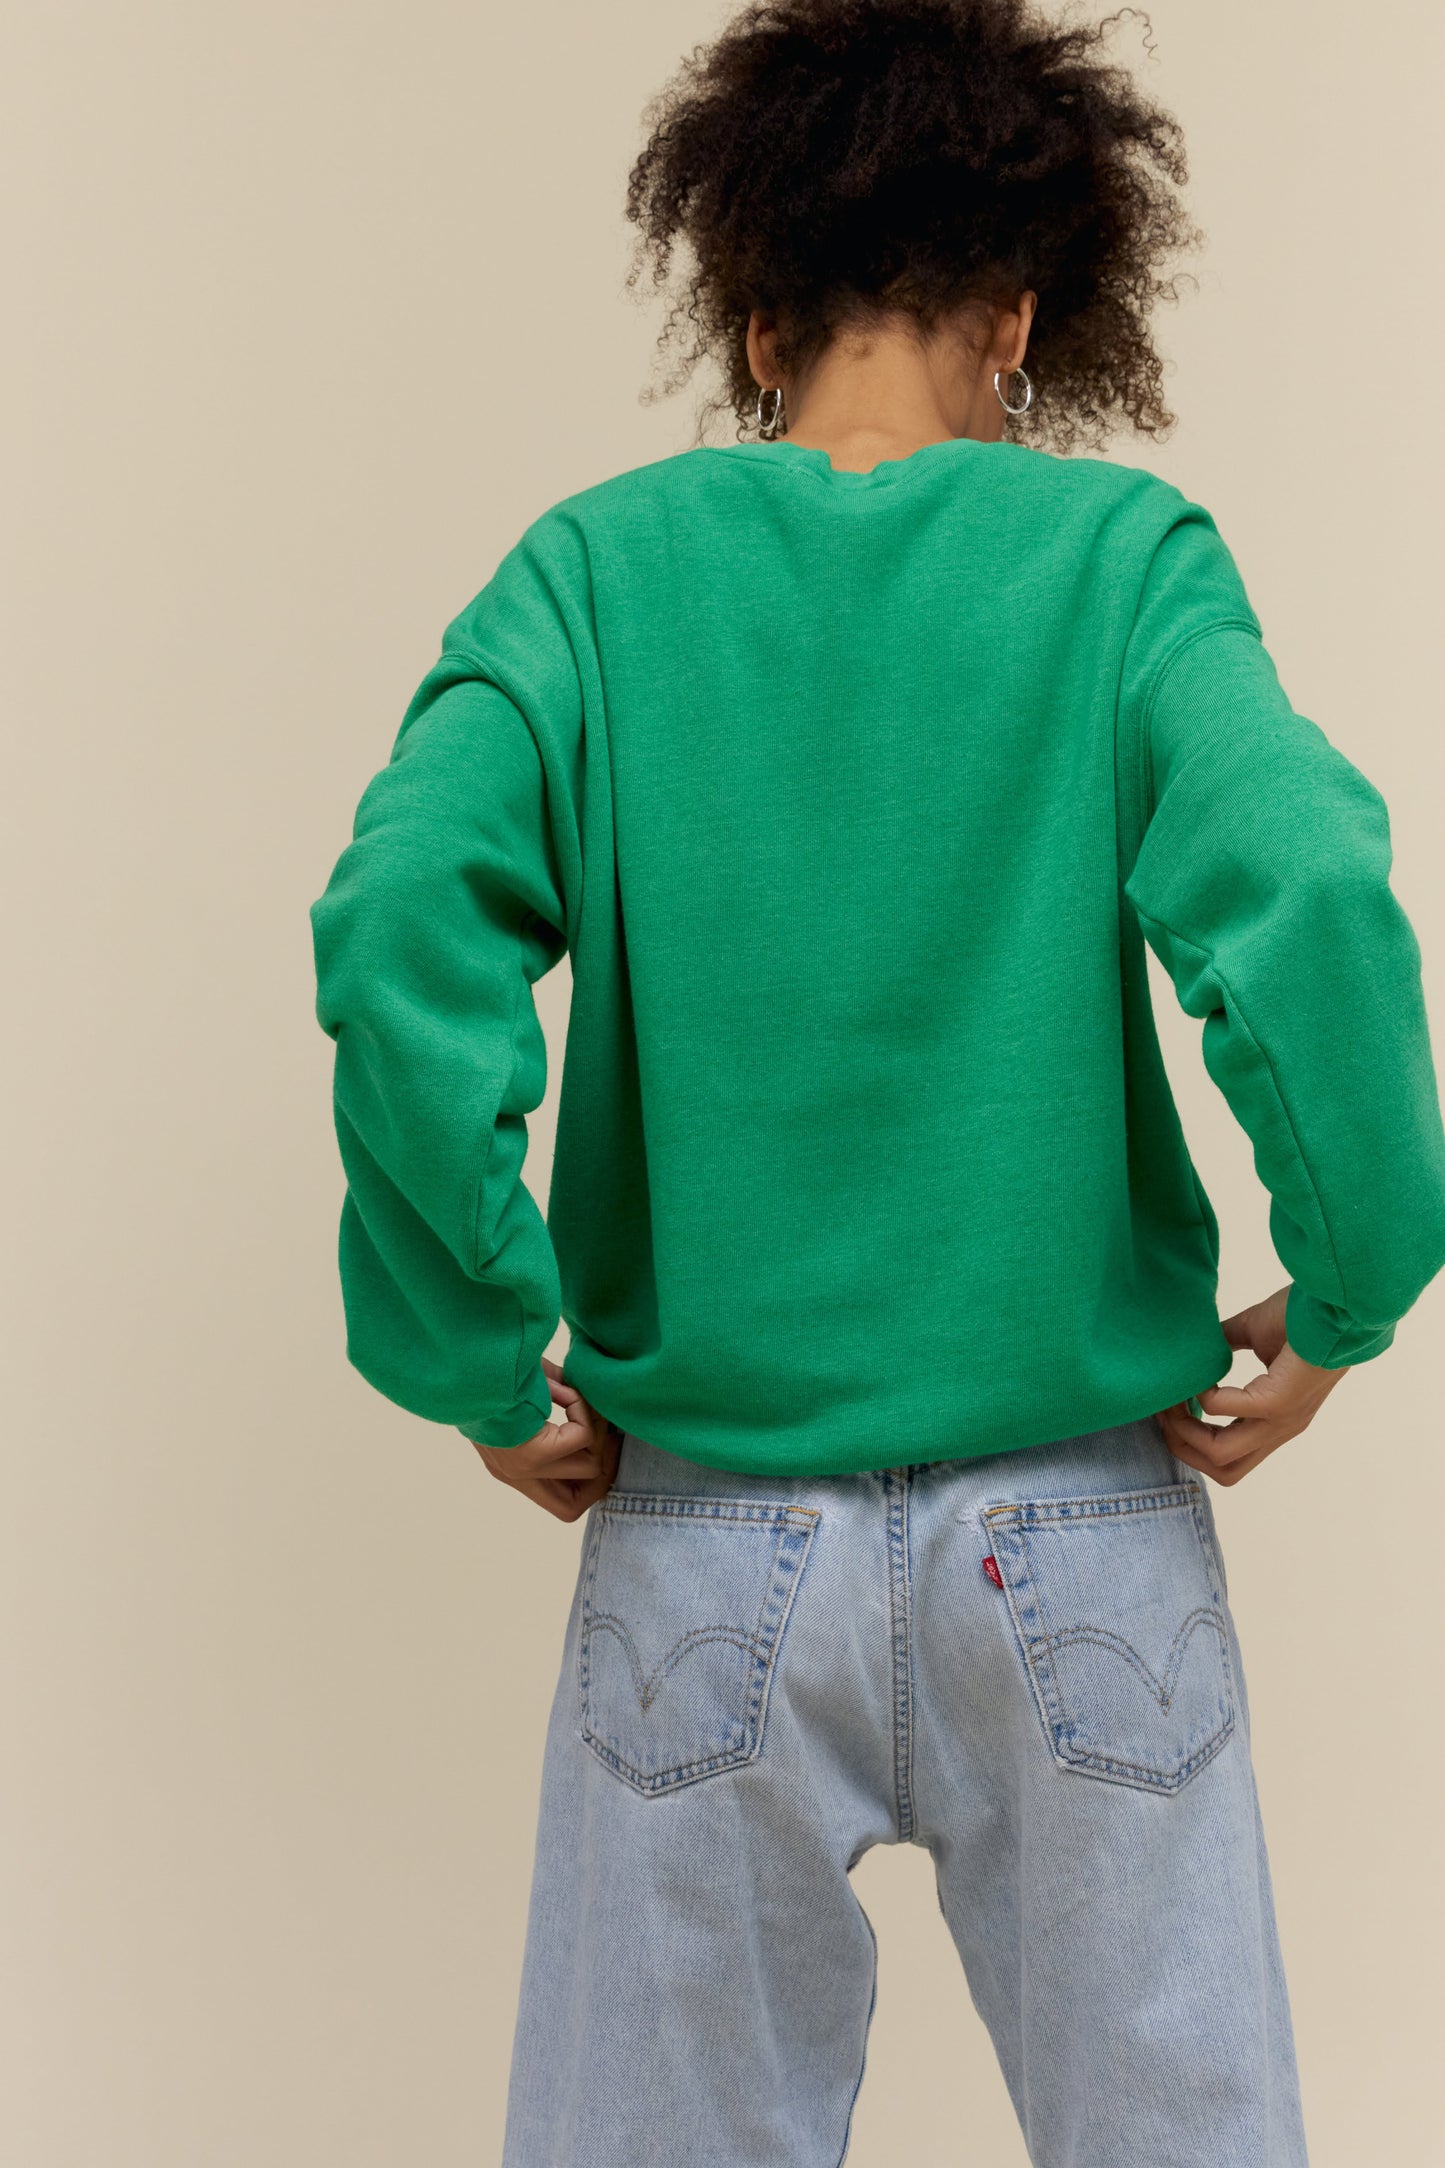 Curly-haired model wearing an oversized tri-blend fleece sweatshirt in green with contrast orange 'Tokyo' collegiate style lettering